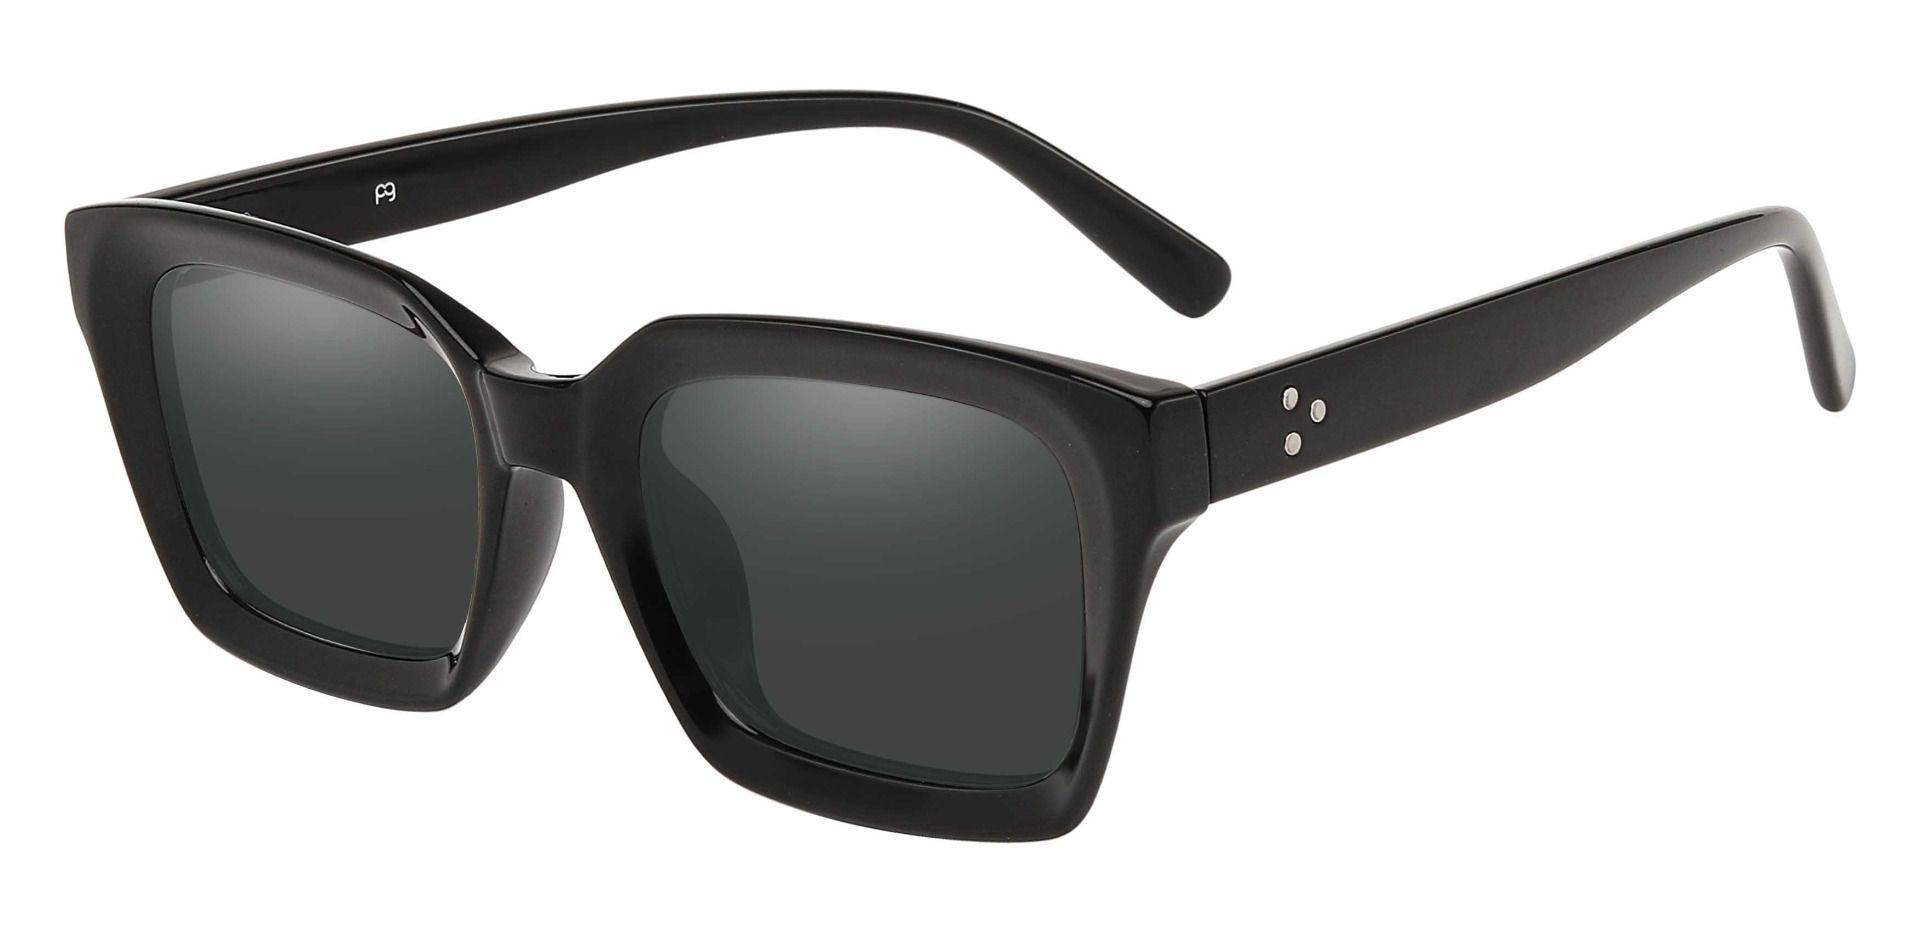 Unity Rectangle Non-Rx Sunglasses - Black Frame With Gray Lenses